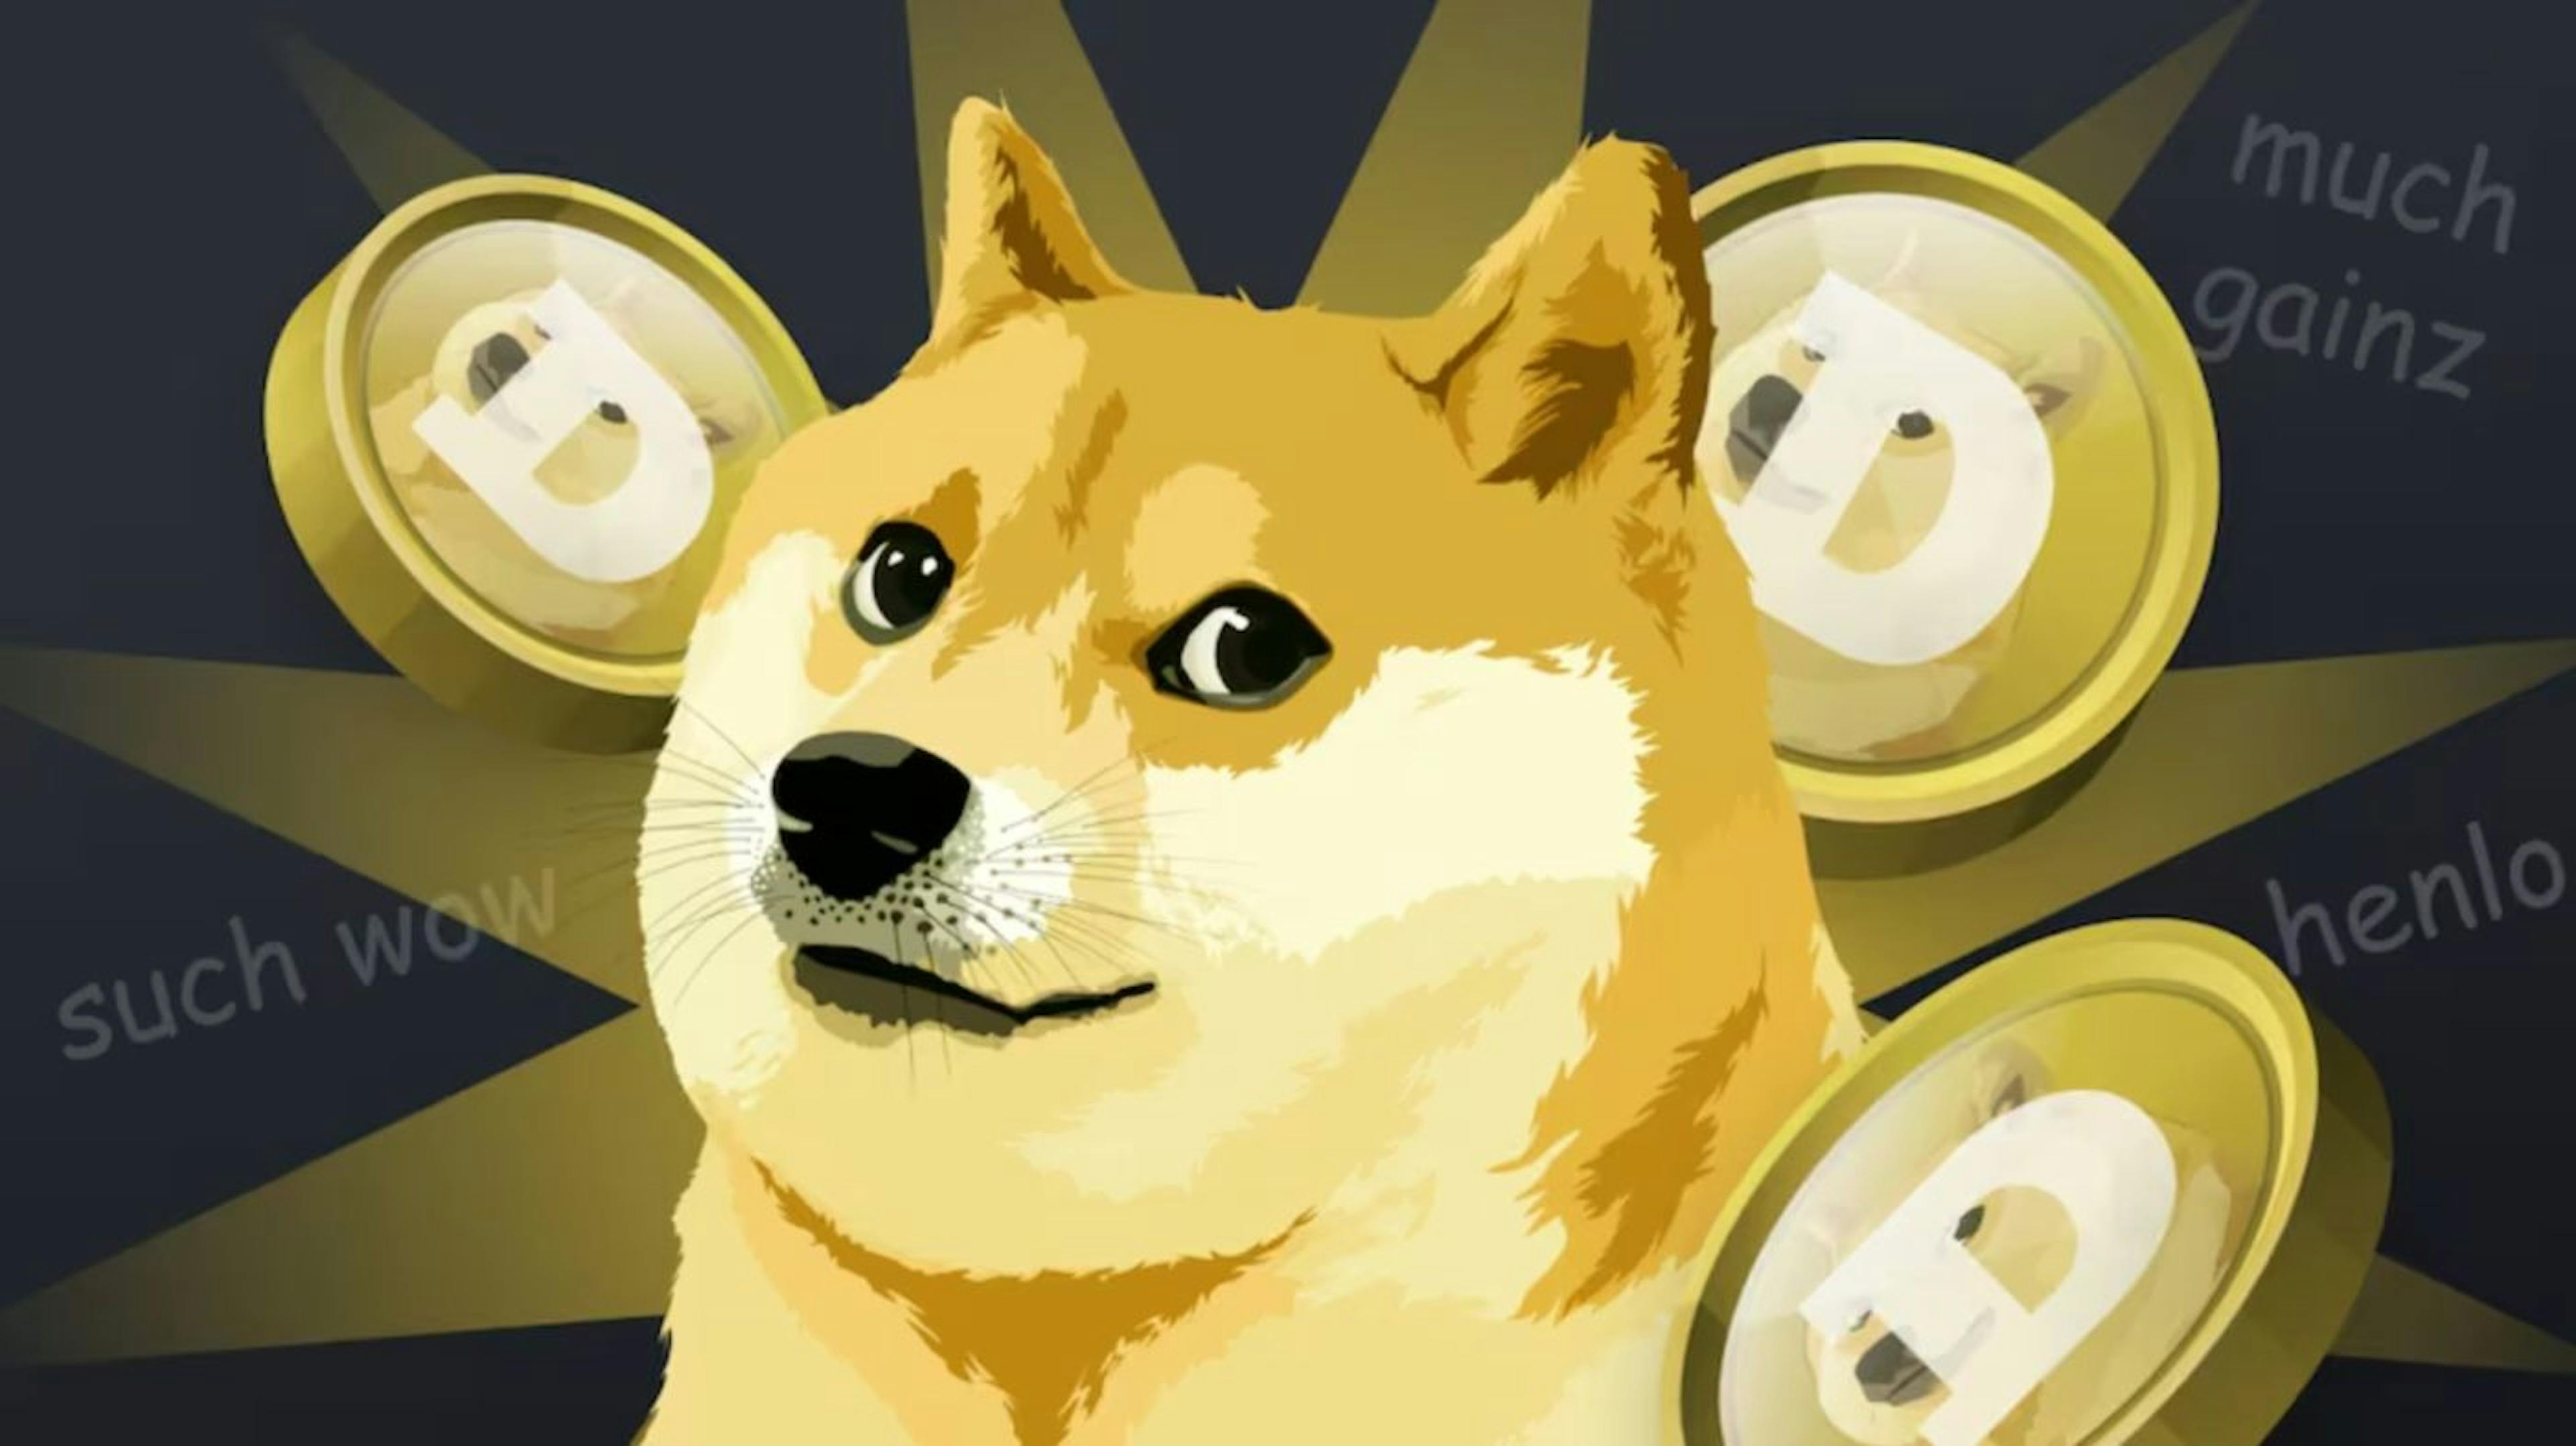 Source: https://www.businesstoday.in/technology/story/doge-to-the-moon-crypto-coin-surges-30-after-elon-musk-replaces-doge-with-twitter-logo-375973-2023-04-04